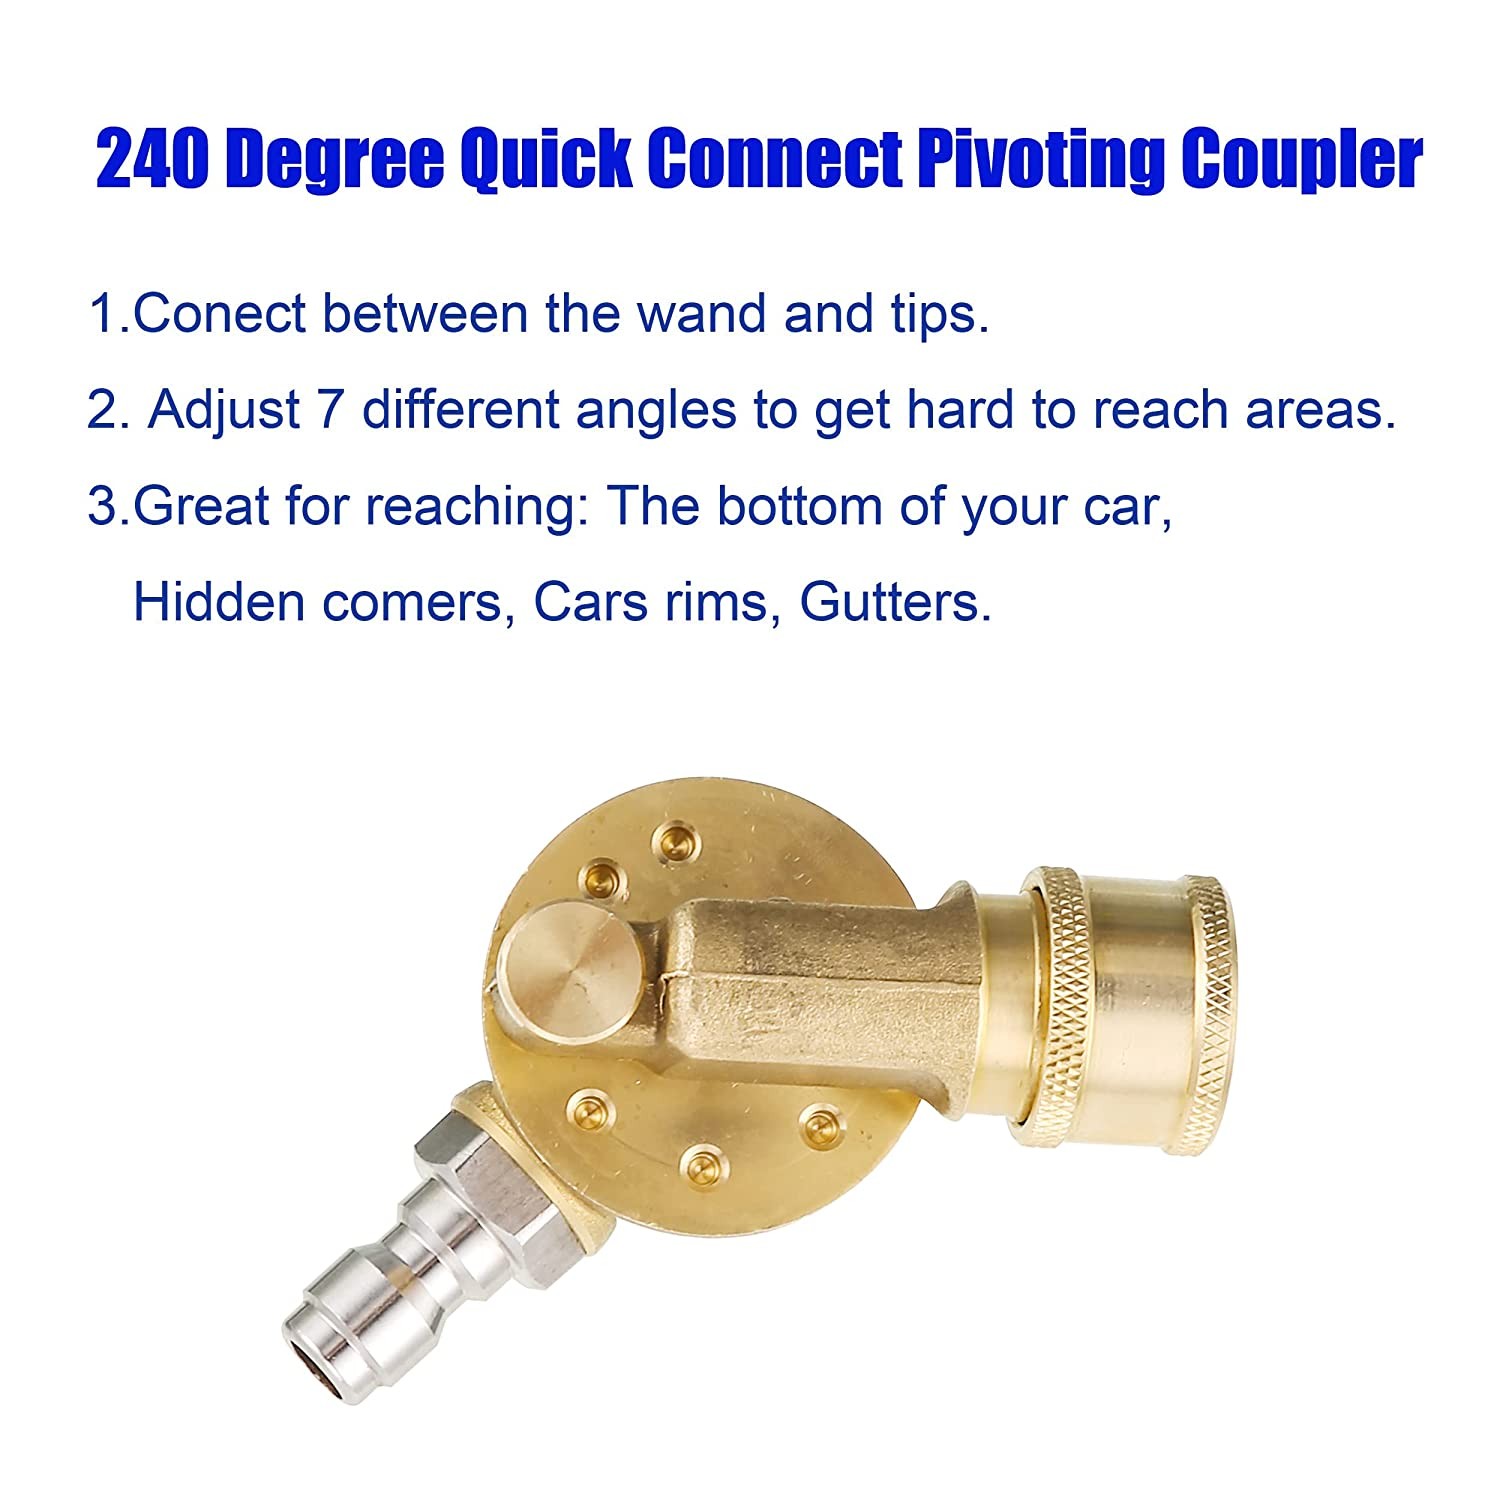 Gutter Cleaner Attachment, Pivoting Coupler for Pressure Washer Nozzle